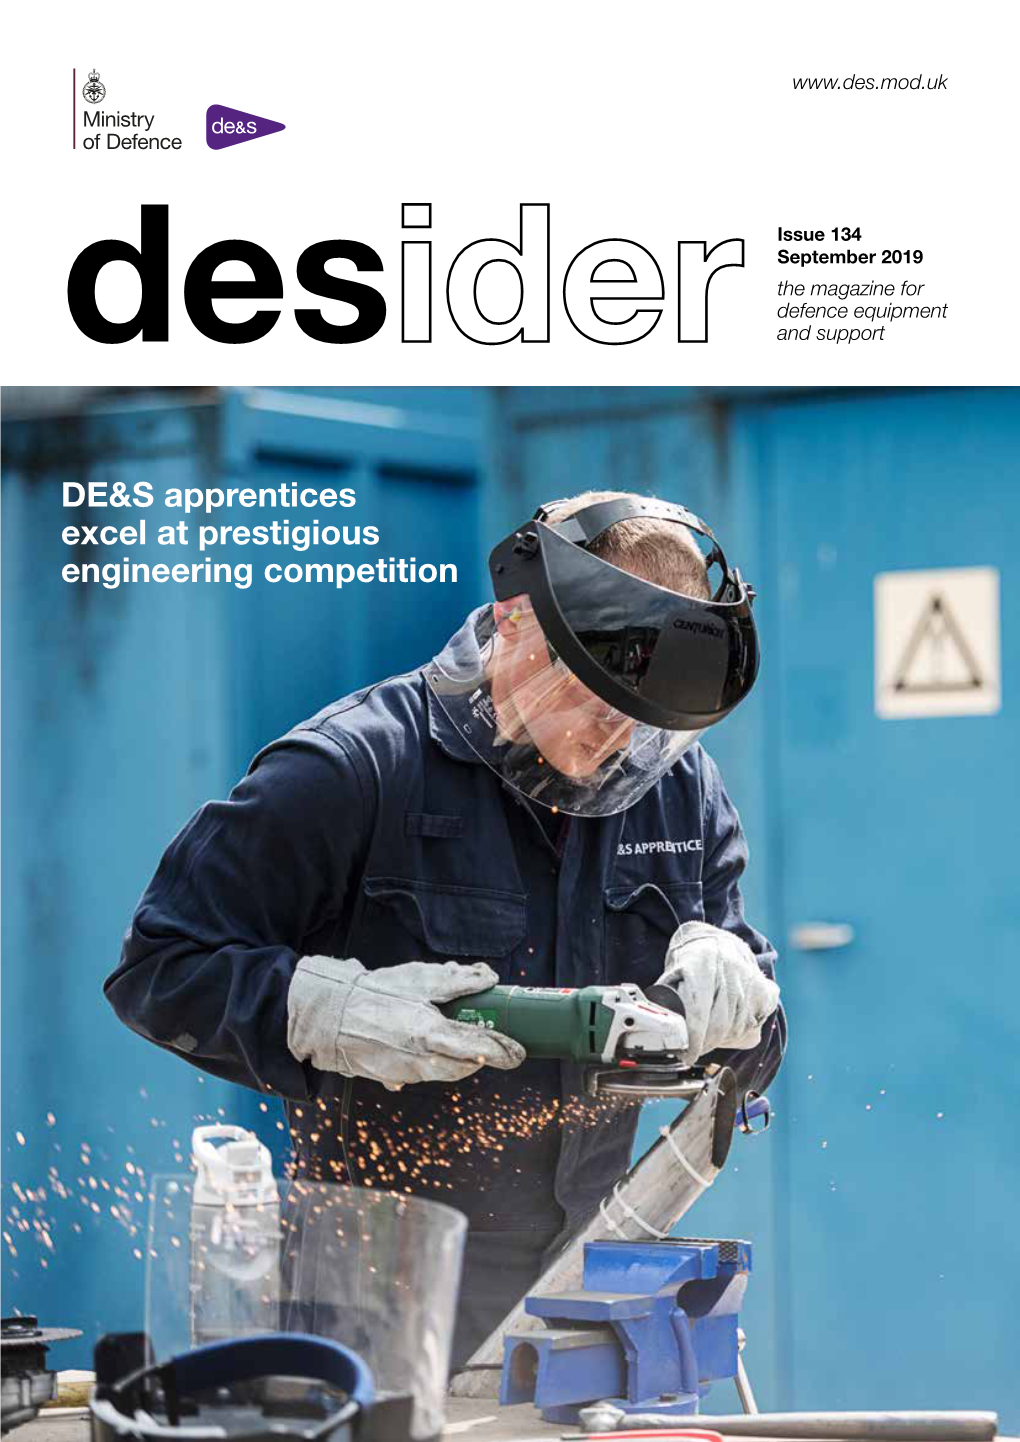 Desider September 2019 Feature Contents